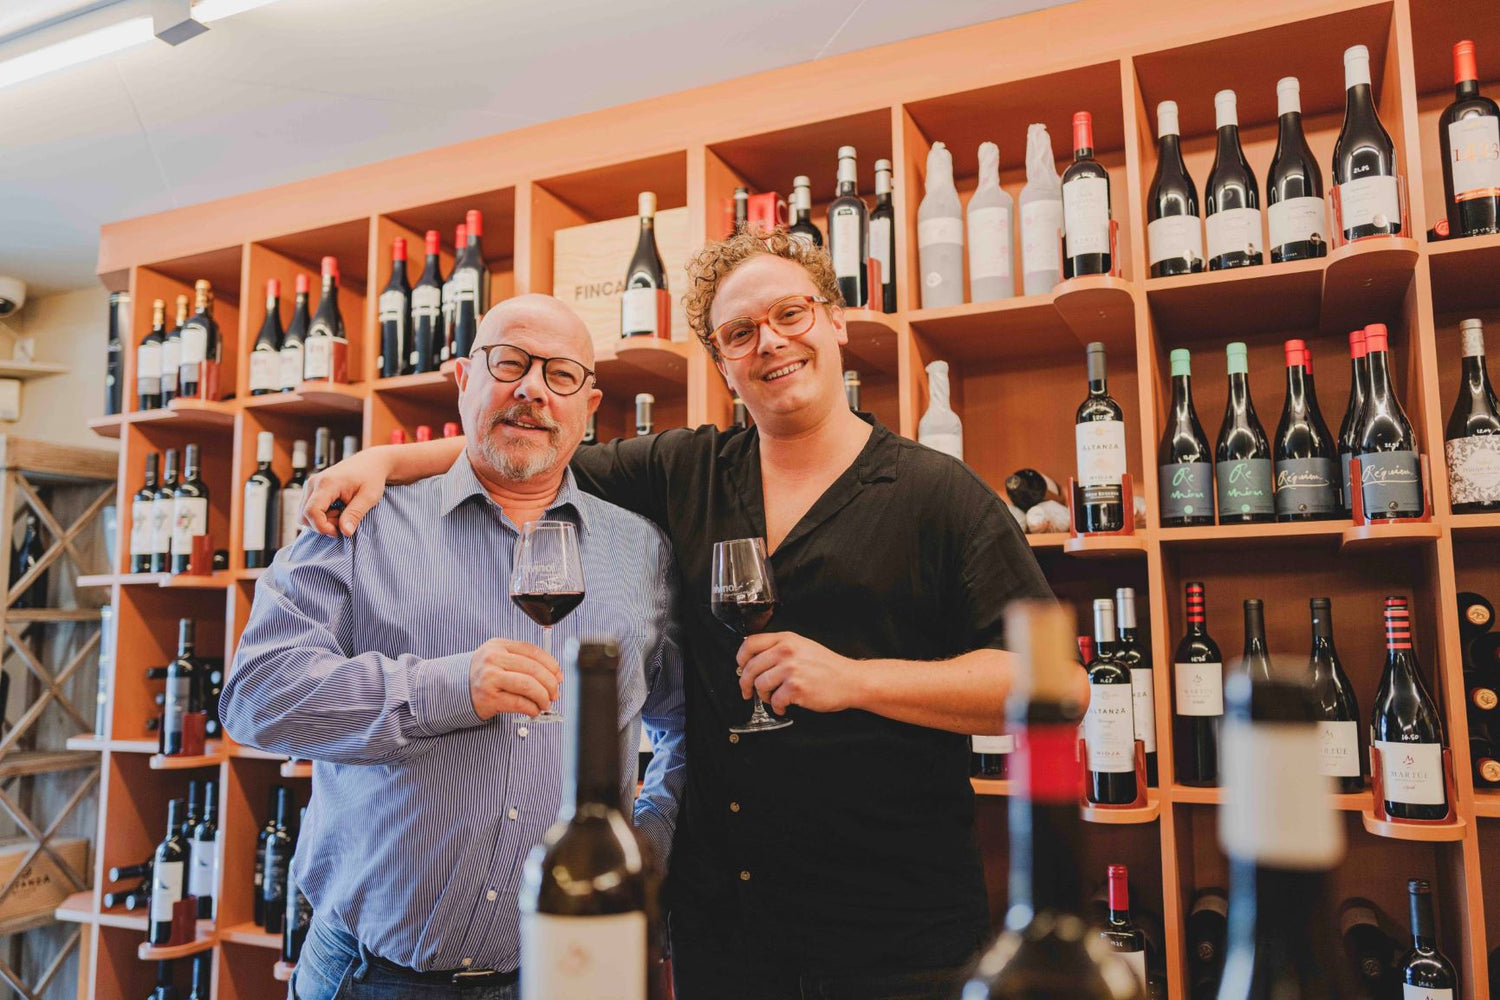 Guy and Tom pose for a picture in the wine store